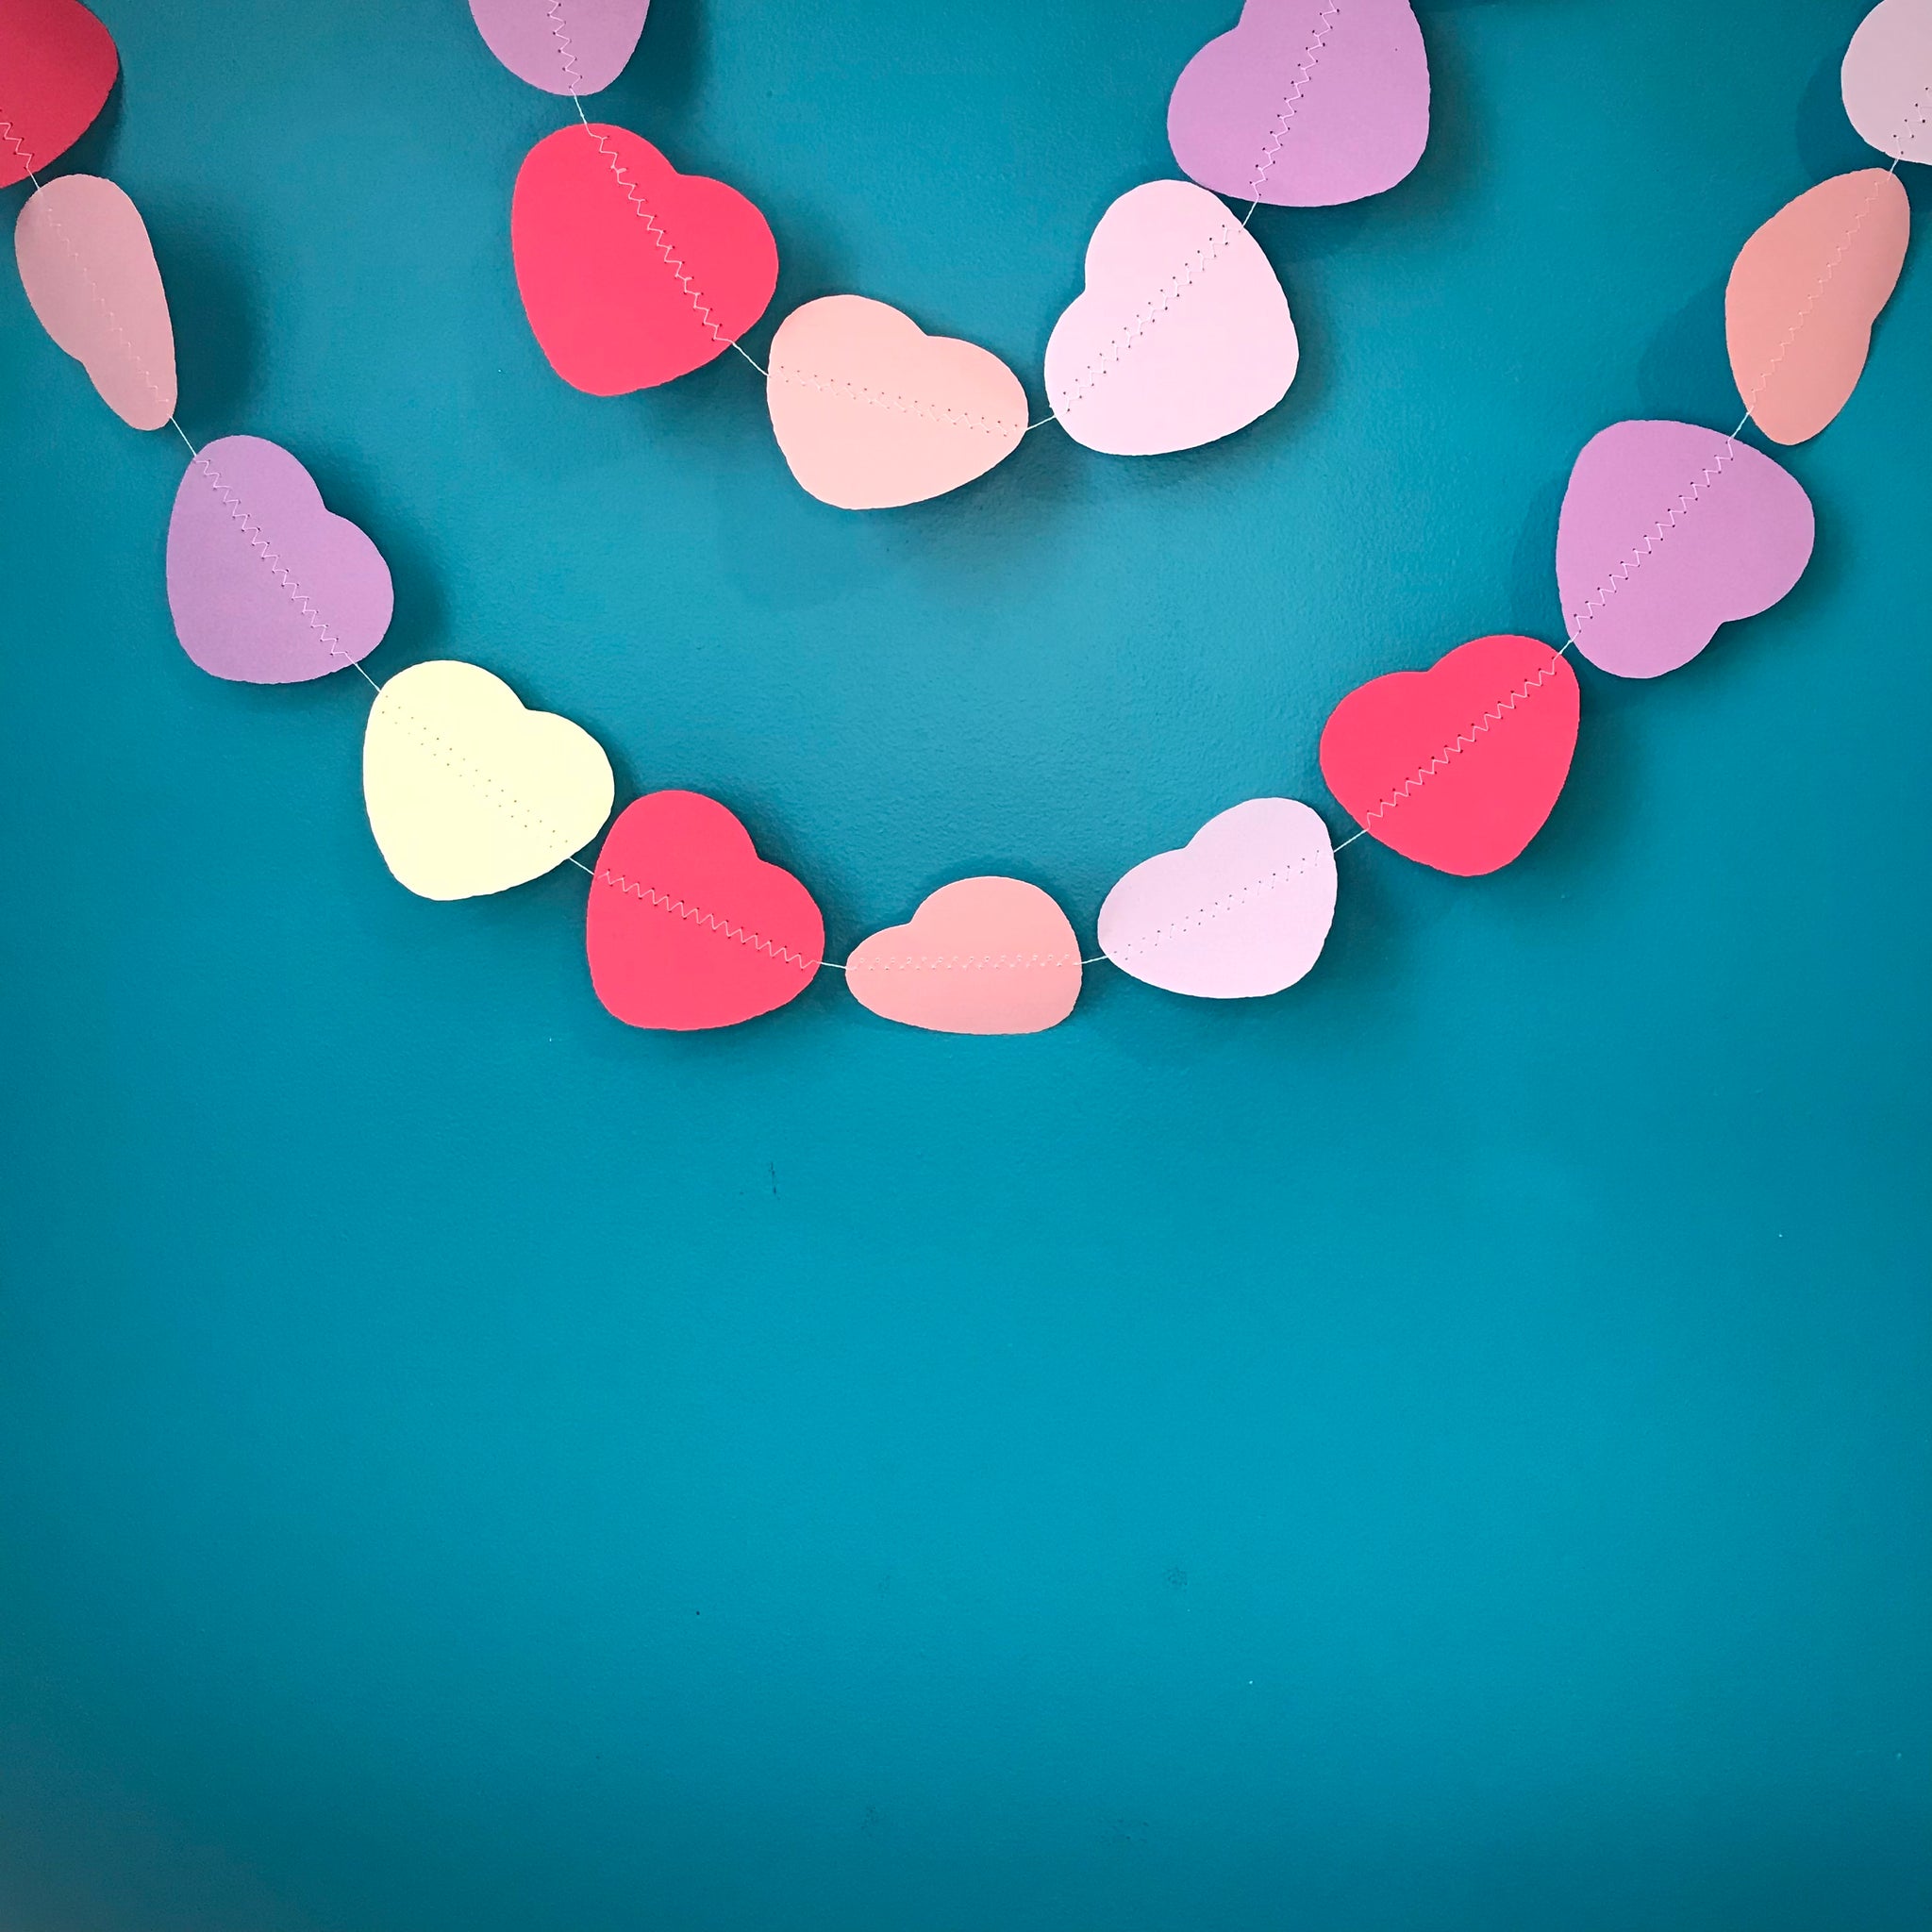 Two strings of heart garlands are shown hanging in loops from the top of the image, against a blue background.  The garlands are made from hearts in a variety of pinks and purples sewn together with white thread